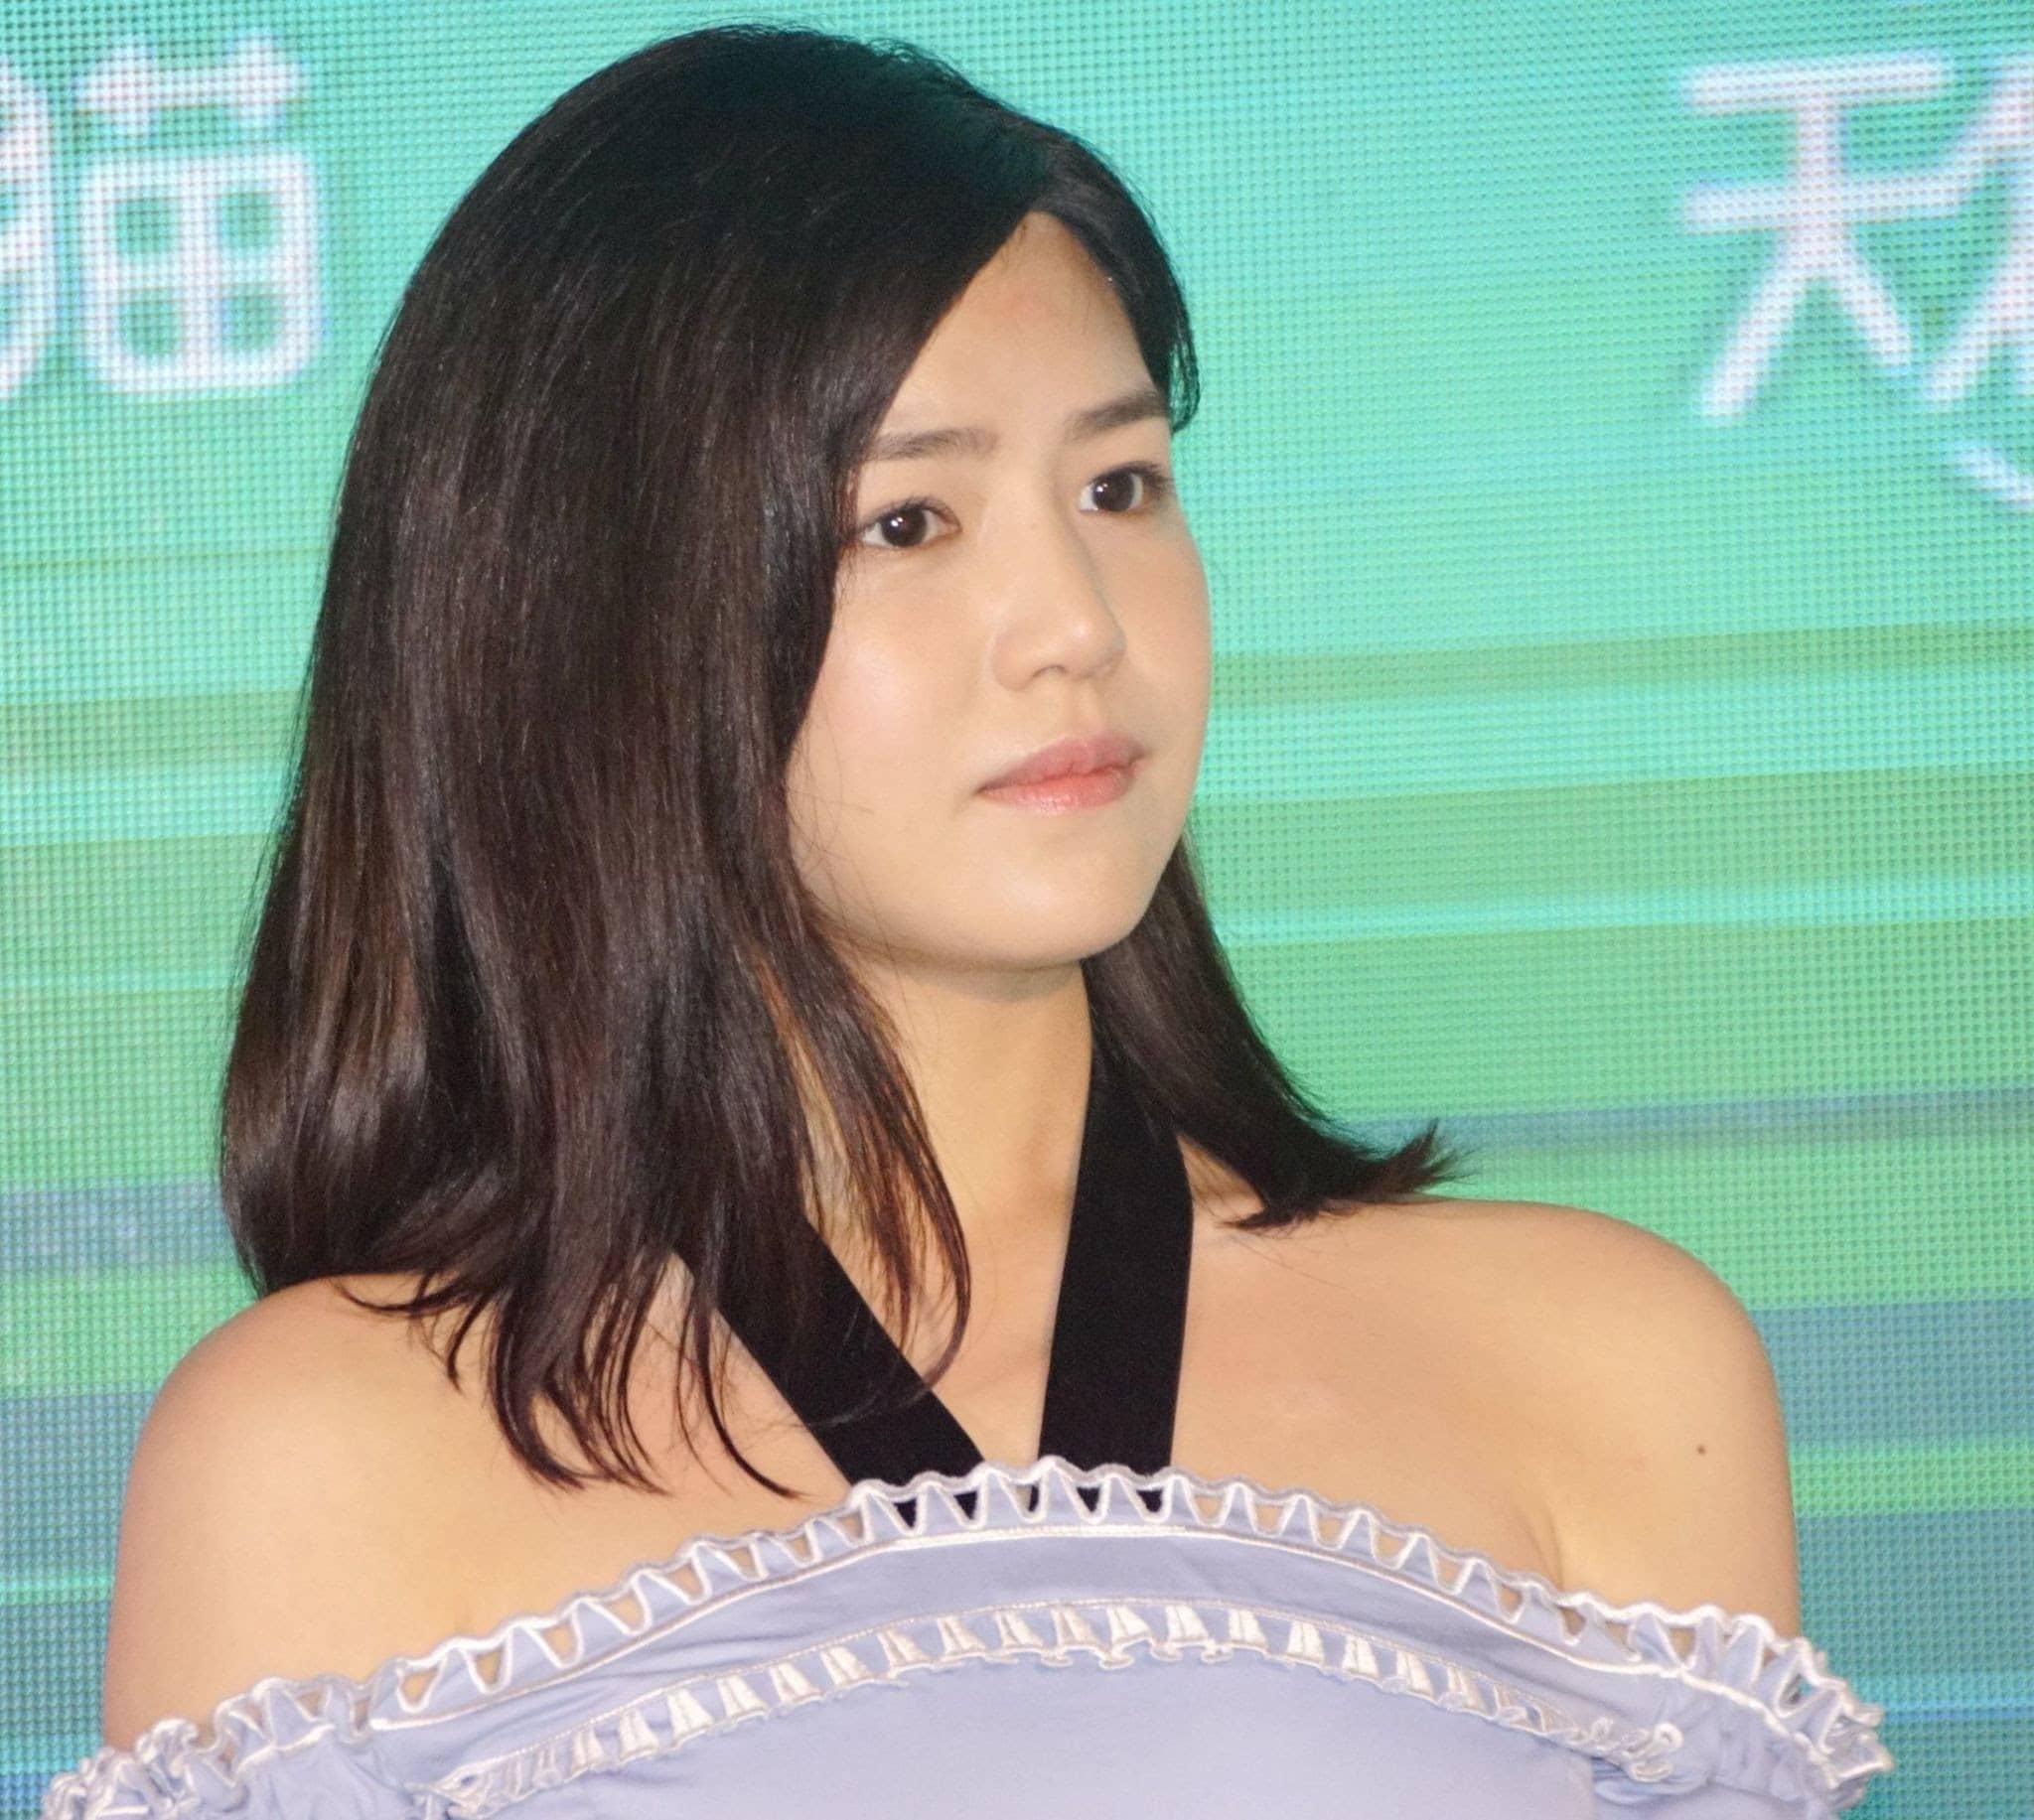 Michelle Chen Taiwanese Actress, Singer, Songwriter